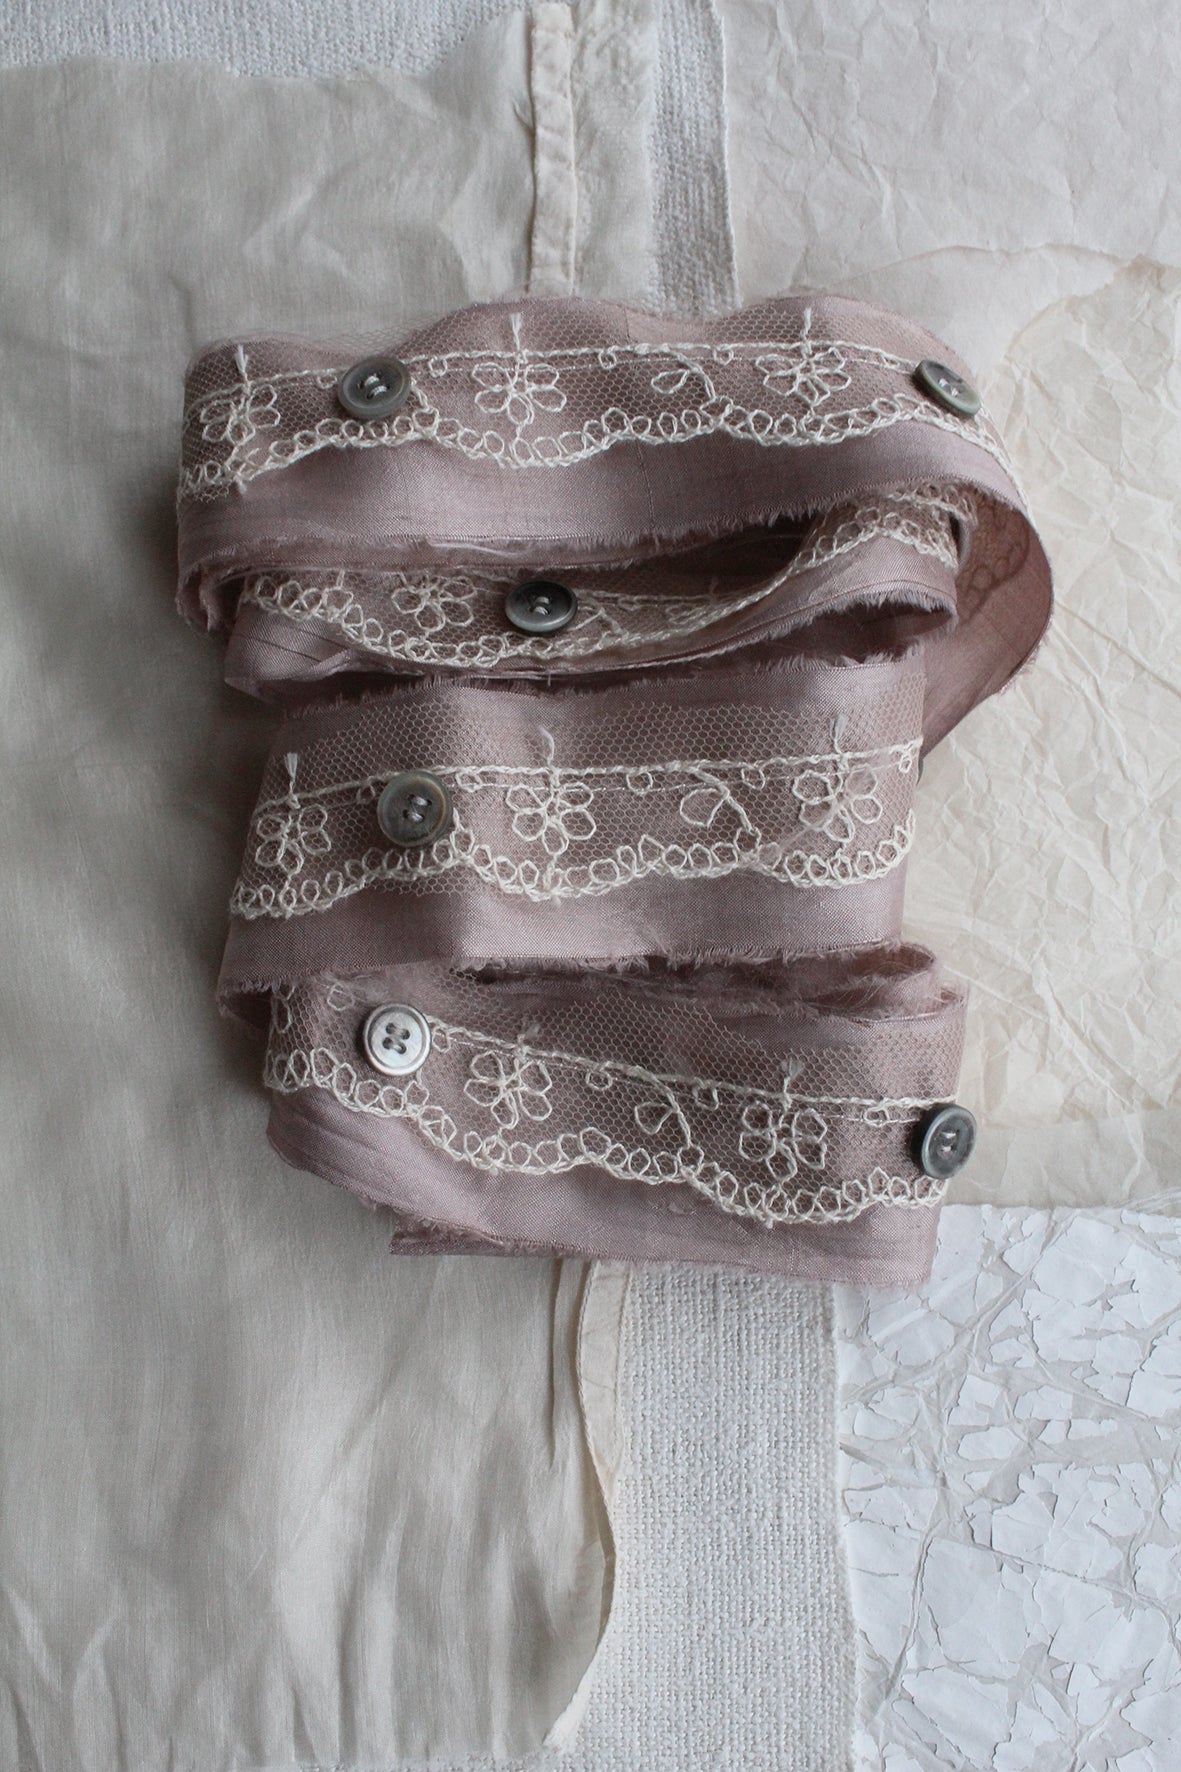 The Patina Collection - Antique Buttons, Delicate Silk & Lace Ribbon (B1)